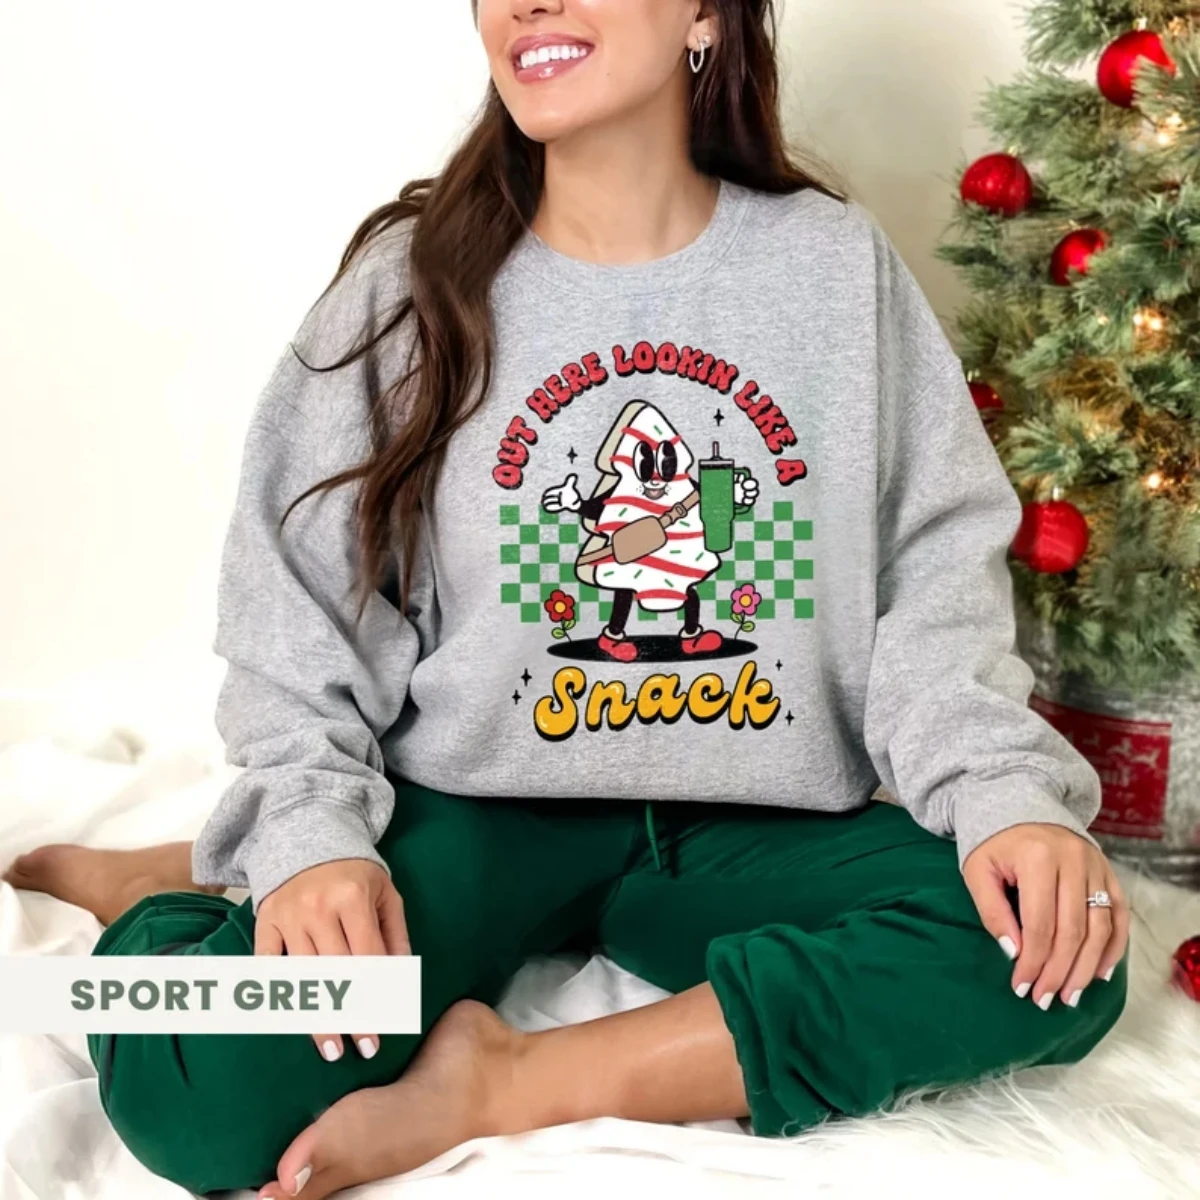 like a snack christmas print sweatshirt casual long sleeve crew neck pullover top winter clothes women Funny Christmas Sweatshirt Out Here Looking Like A Snack Cake Pullover Shirt Little Debbie Christmas Tree Cake Winter Clothes